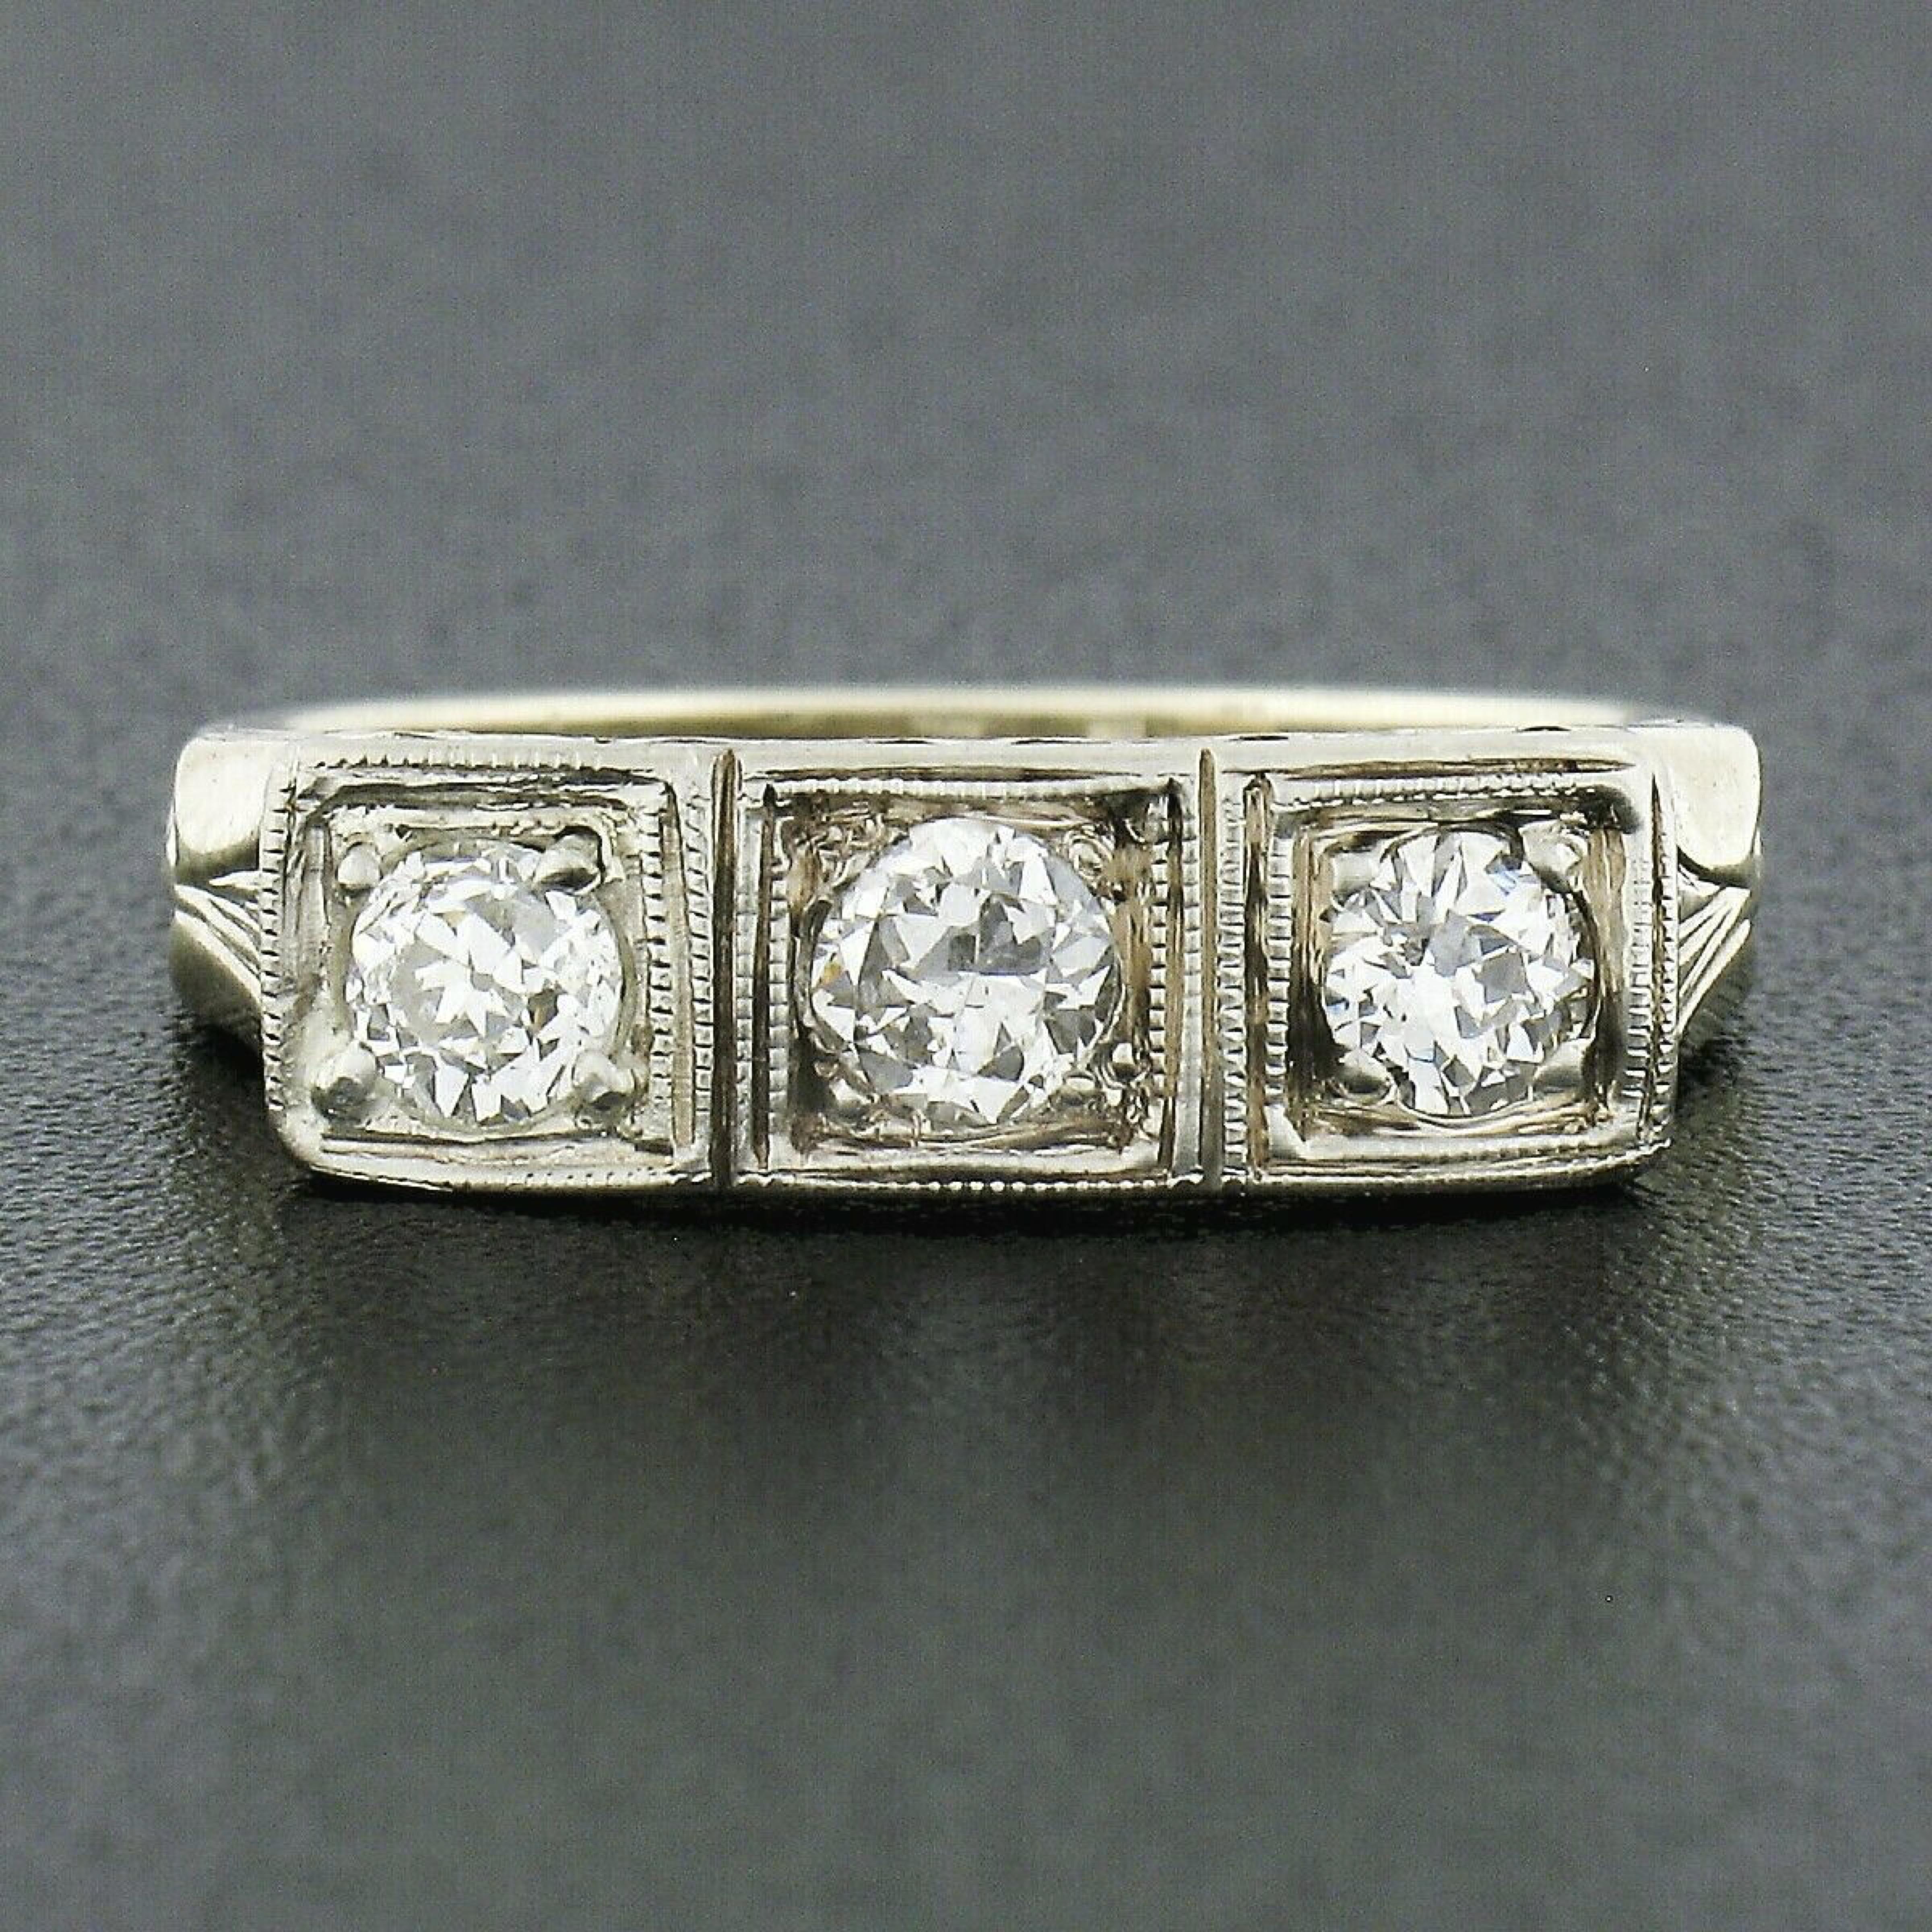 This outstanding antique band ring was crafted during the Edwardian period in solid 14k yellow gold with a white gold top that carries three very fine quality diamonds. These stunning old European cut stones total approximately 0.52 carats in weight